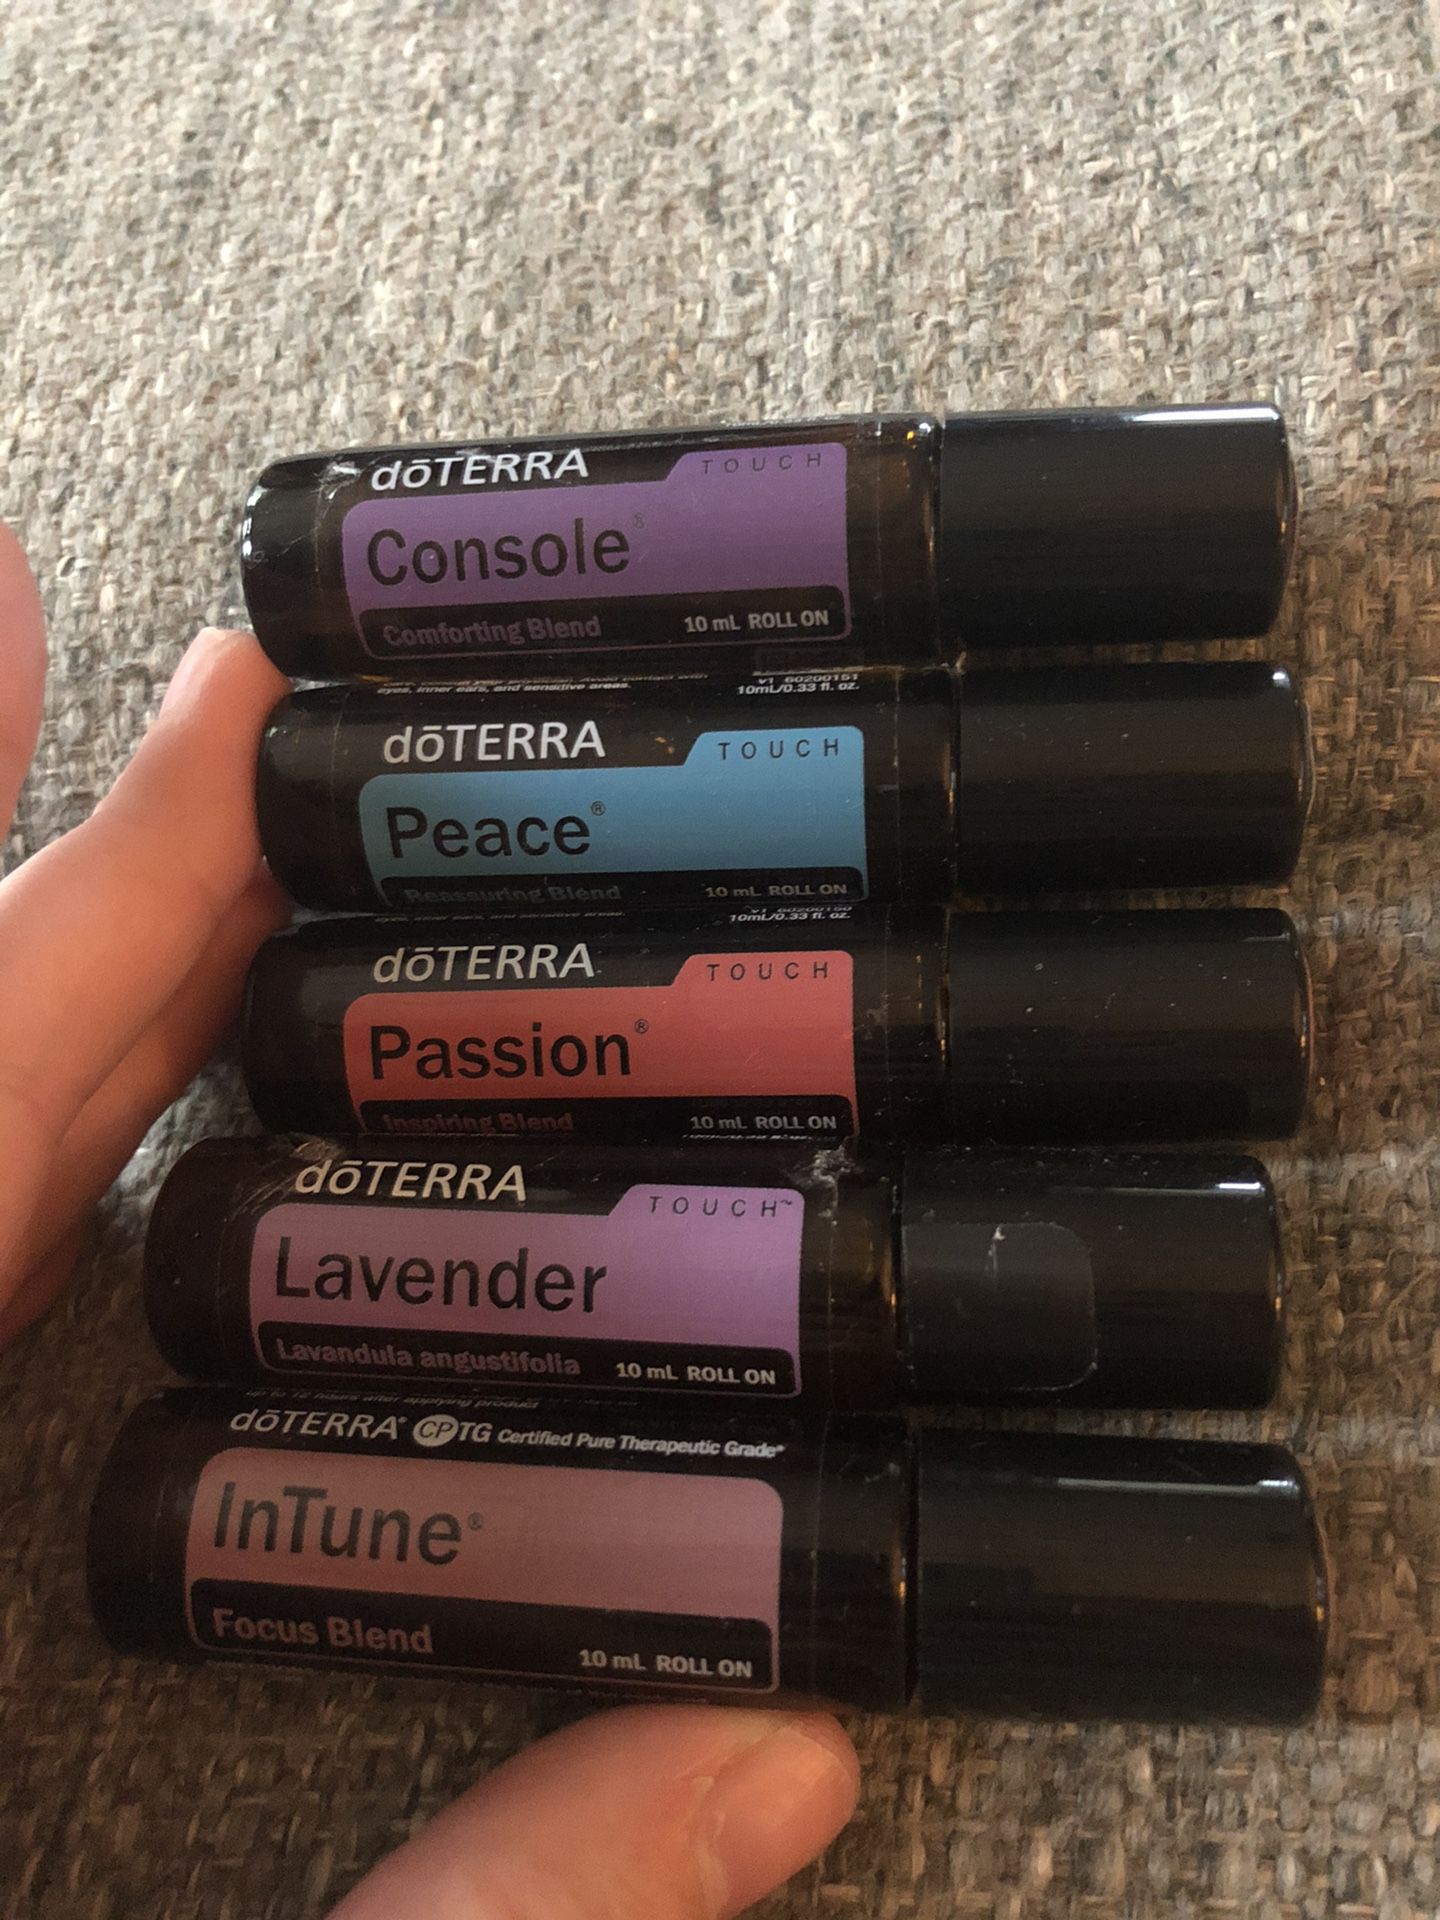 DoTERRA essential oil roll ons - opened but unused